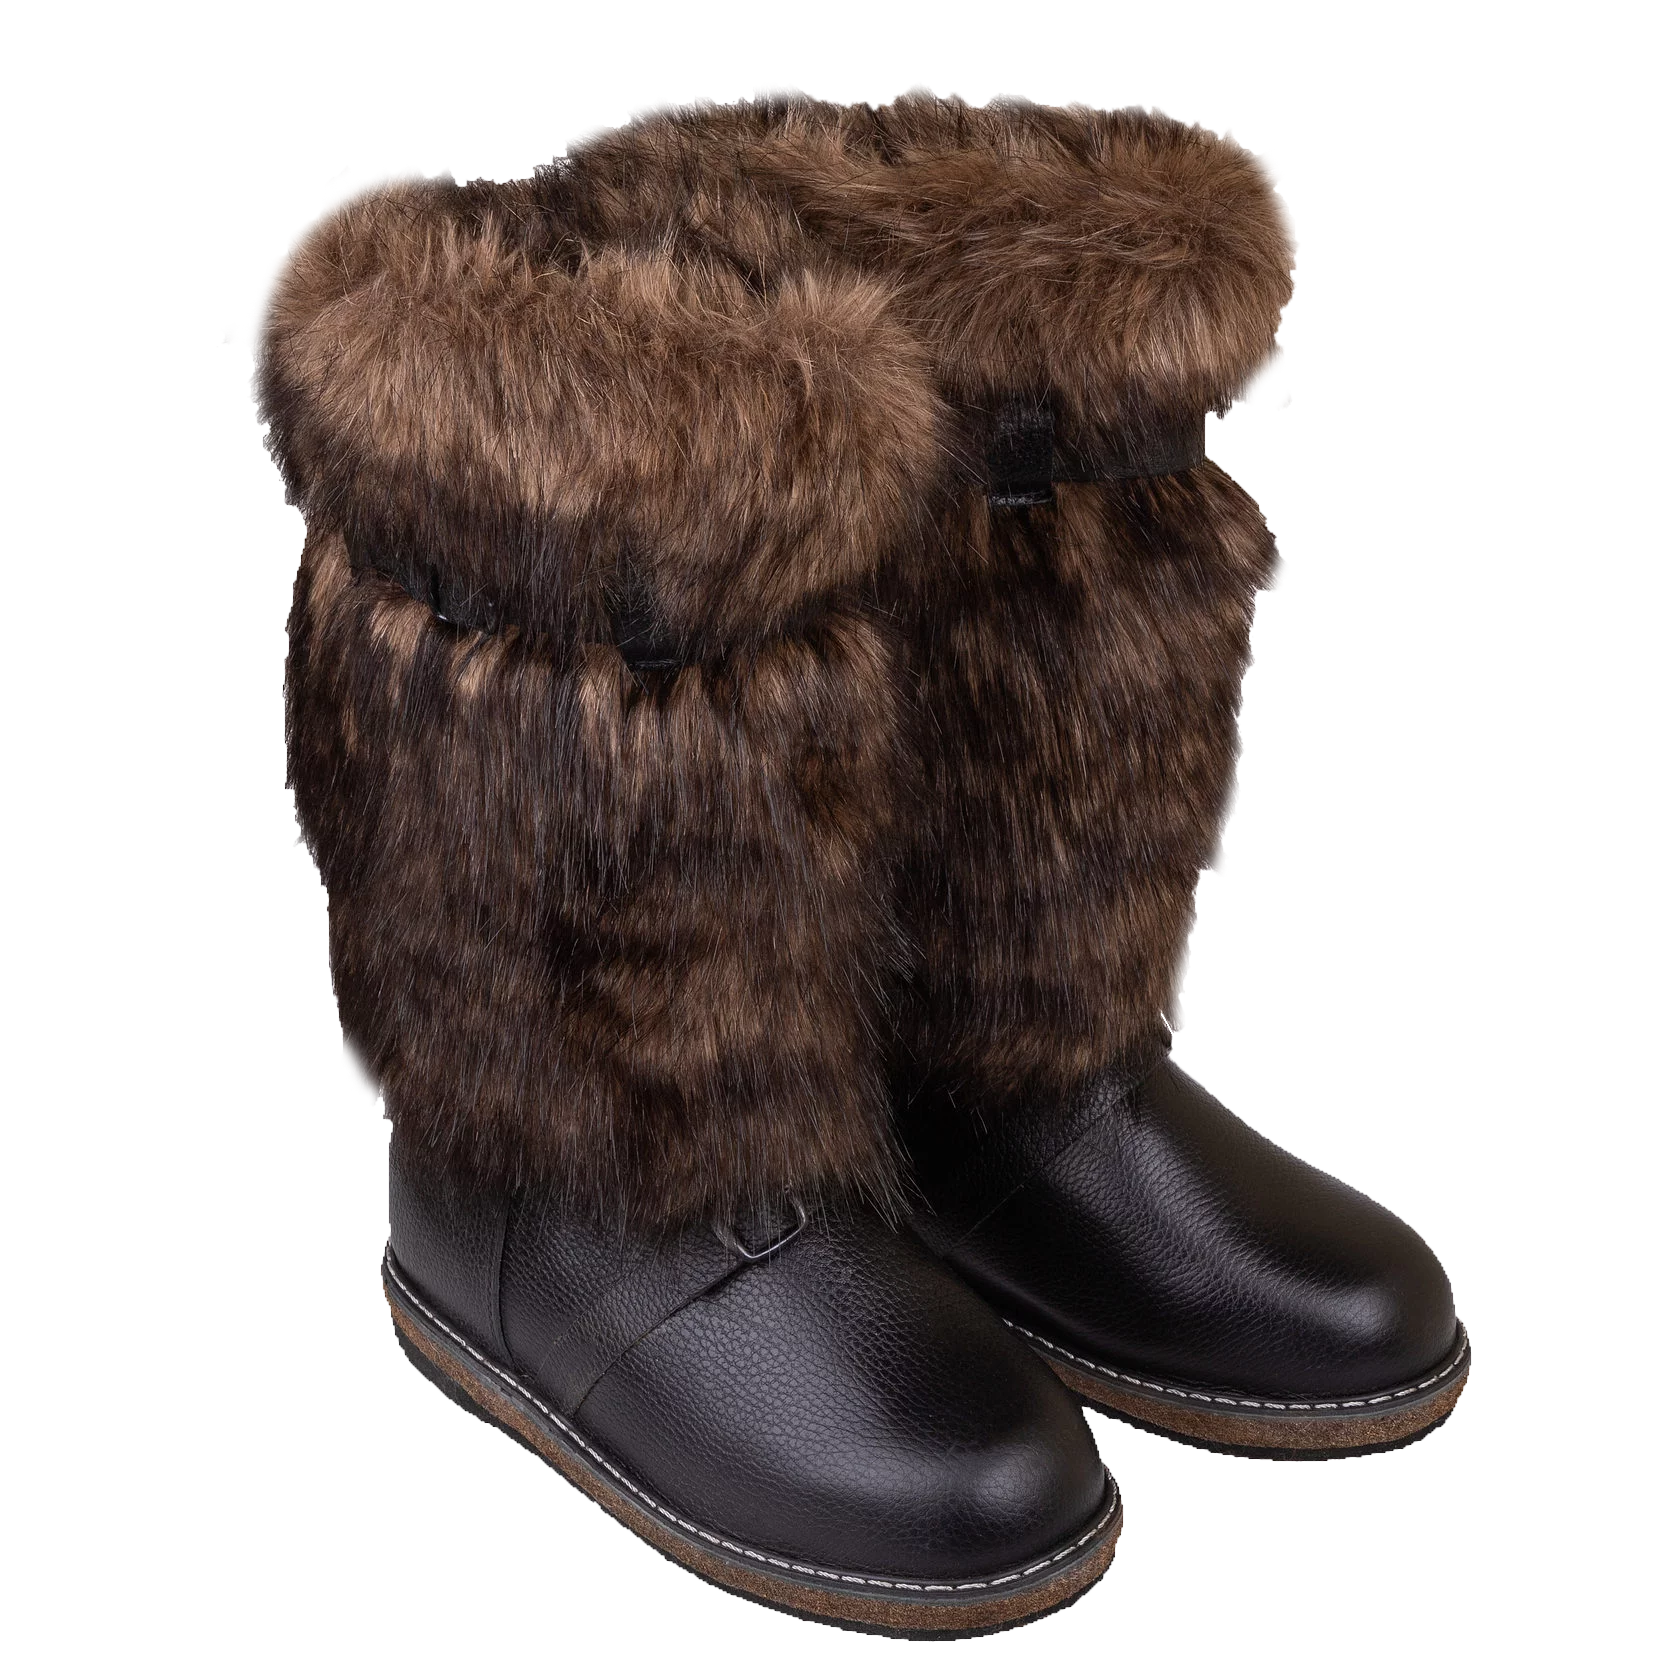 Hunter Russian Mukluk Boots Leather Sheepskin Winter very low temperature 